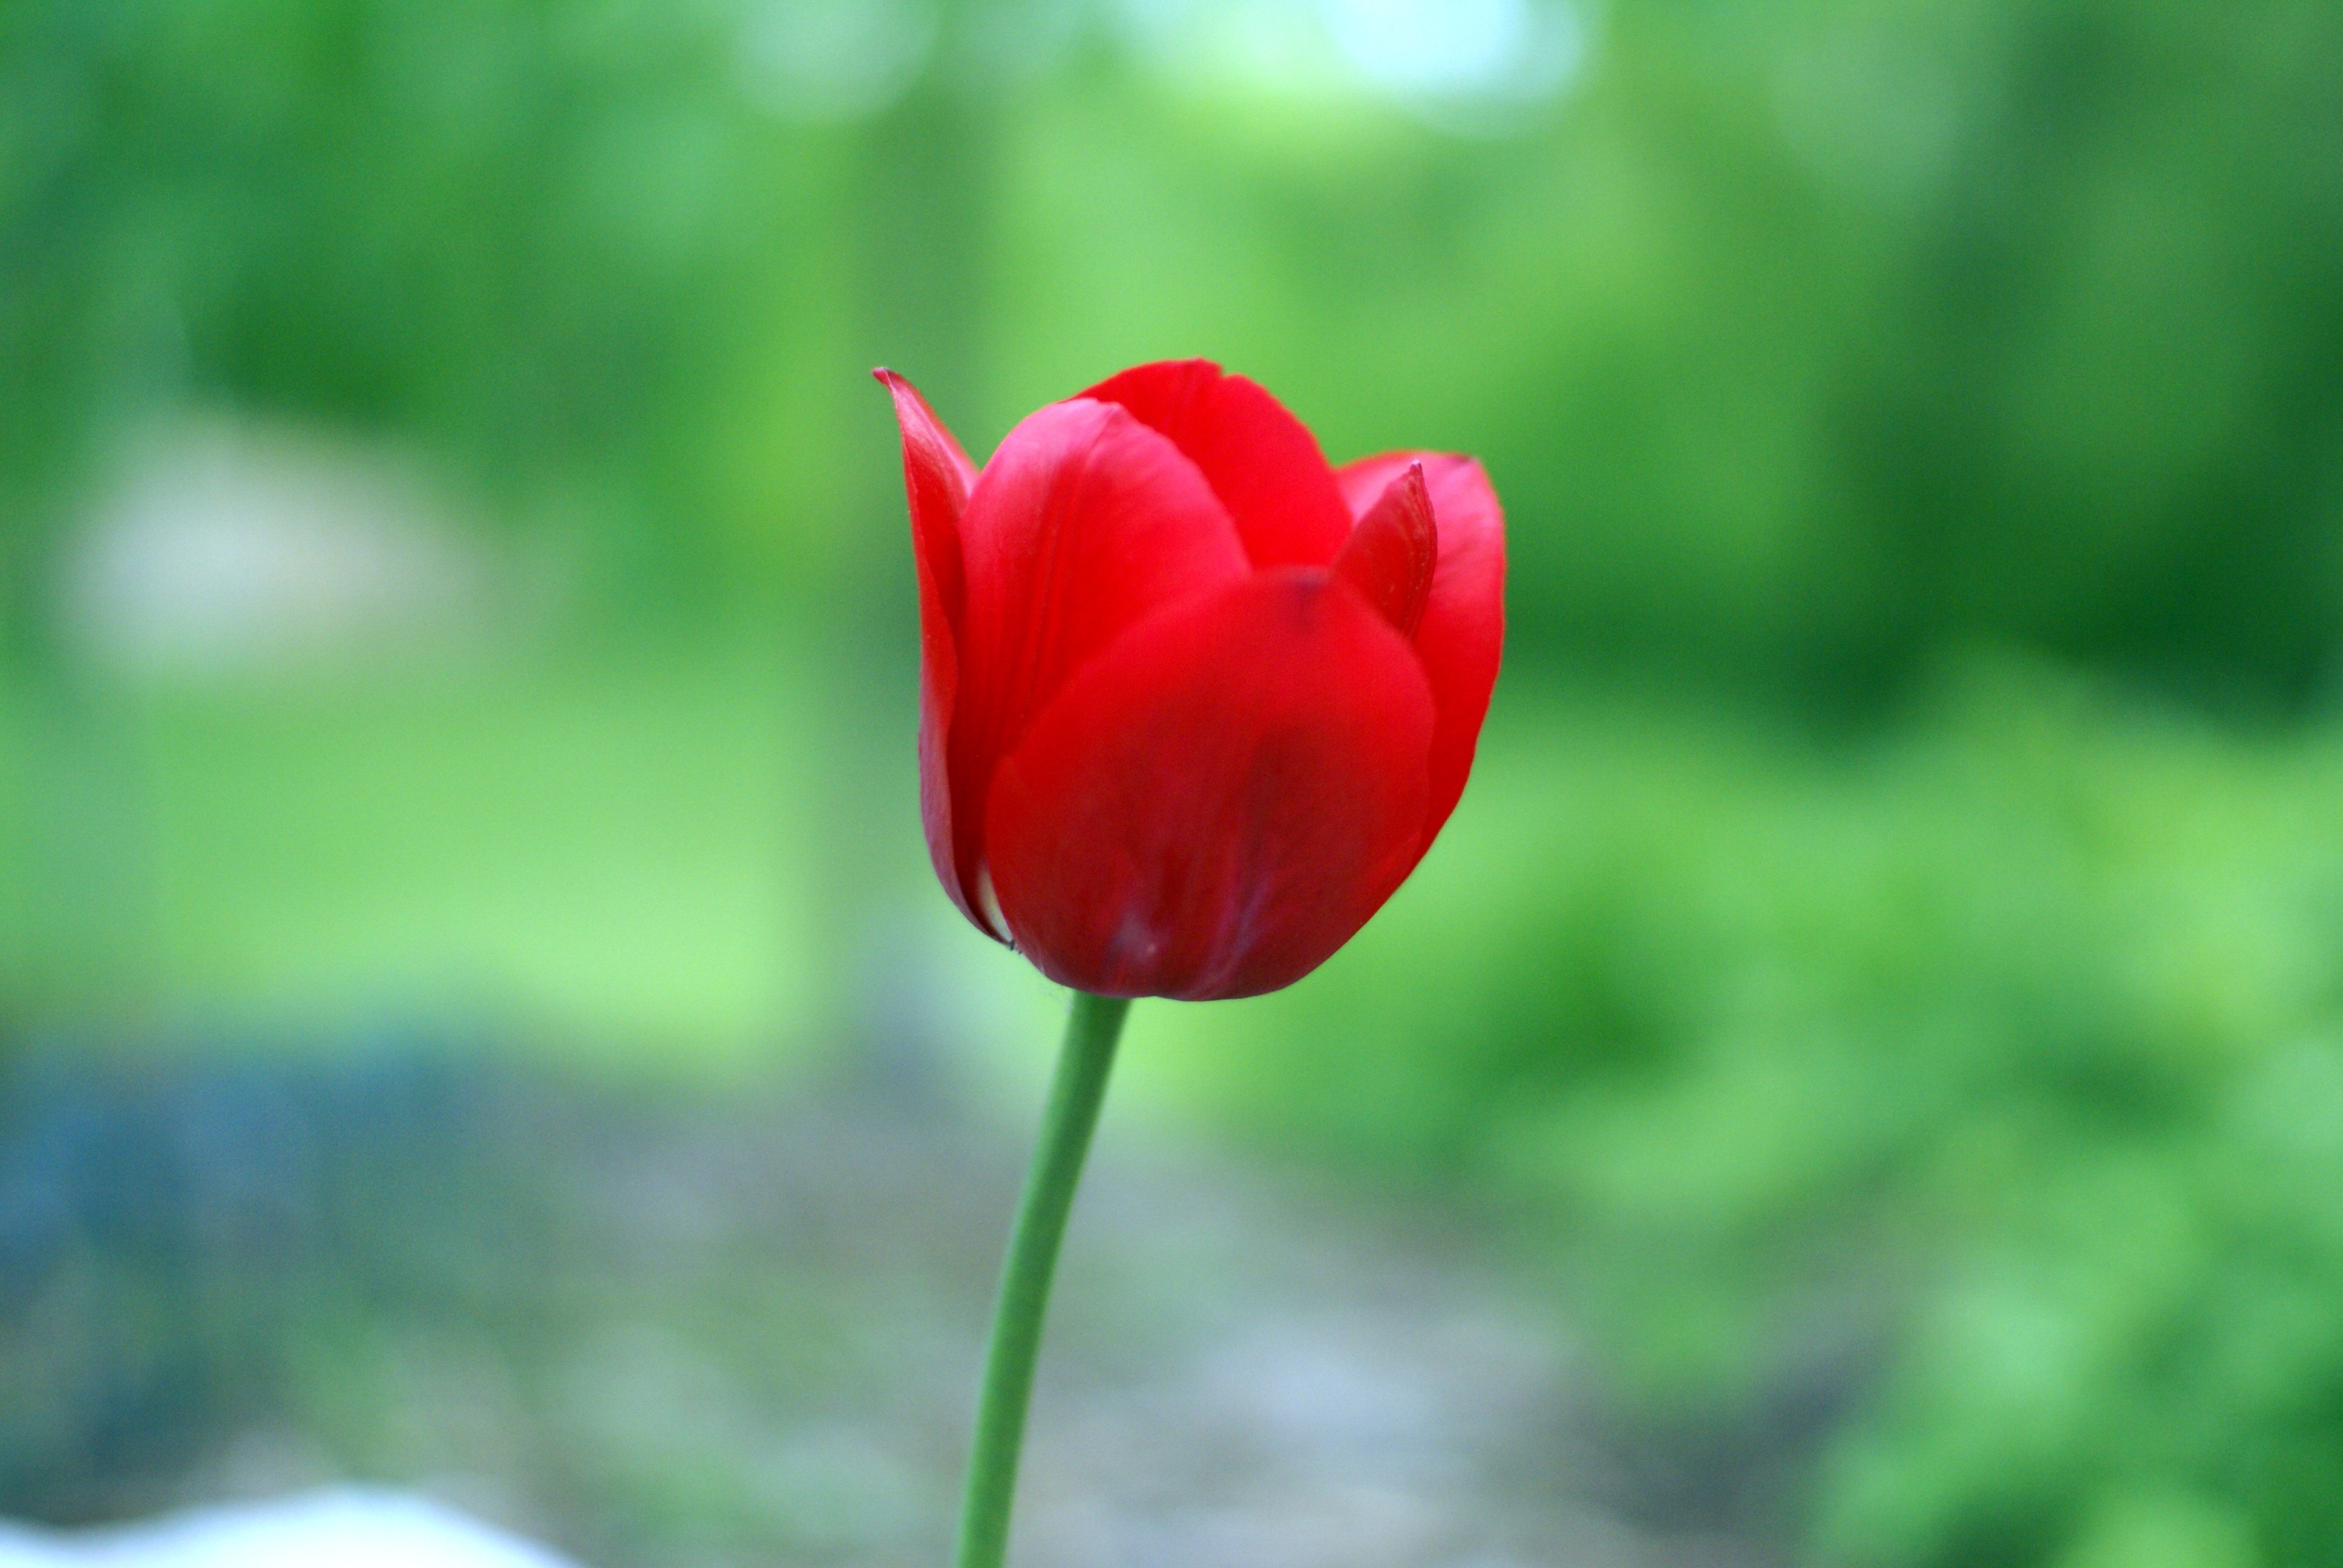 Red Tulip Image | Tulip | Pinterest | Red tulips and Flowers